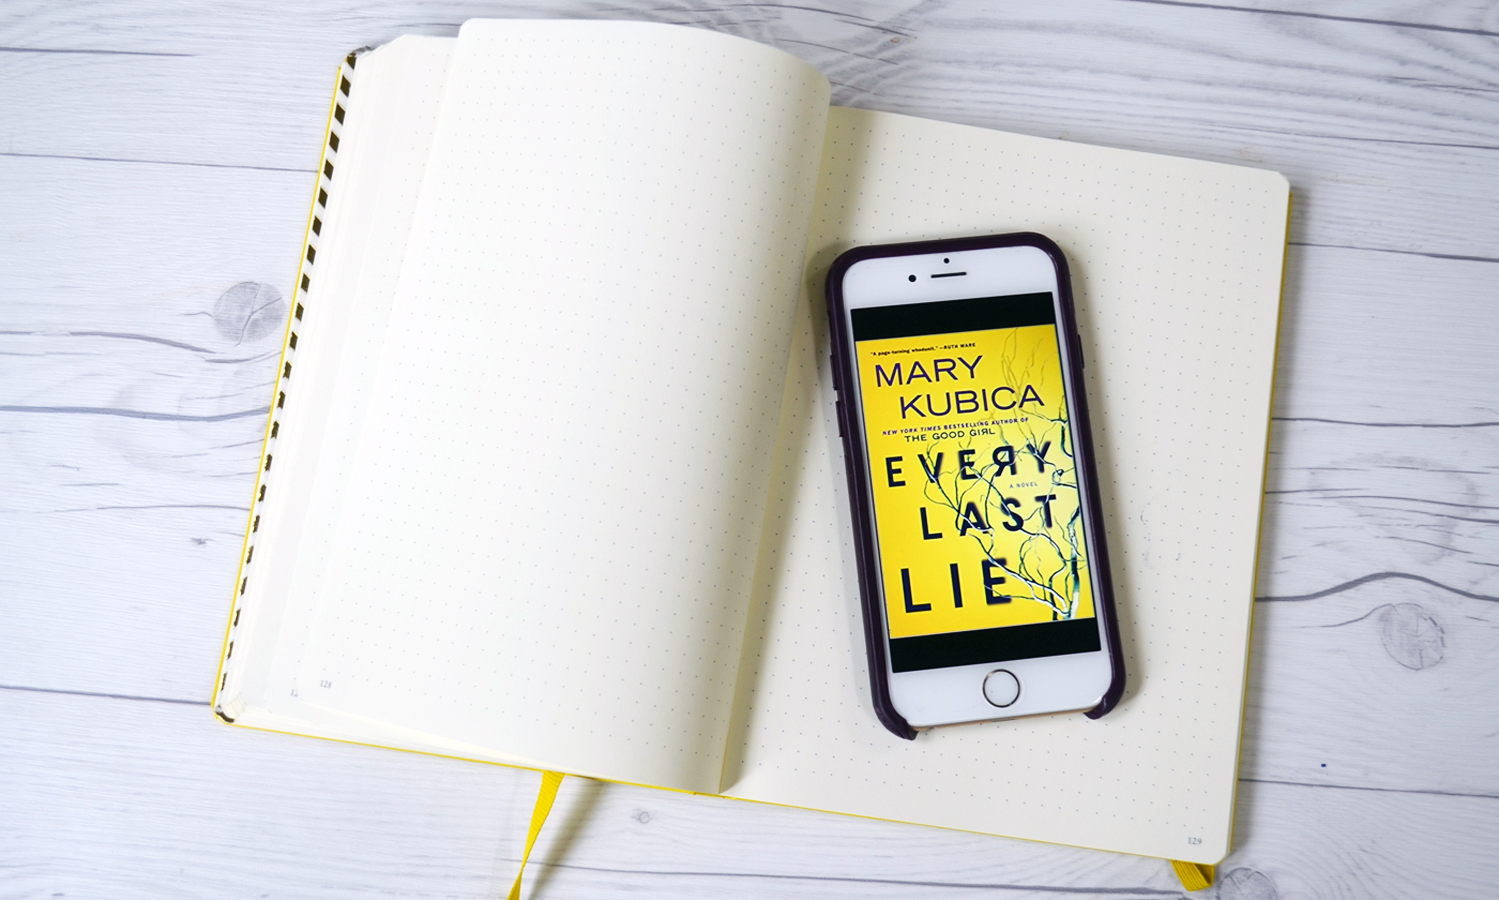 Every Last Lie by Mary Kubica. A very creepy thriller for everyone!